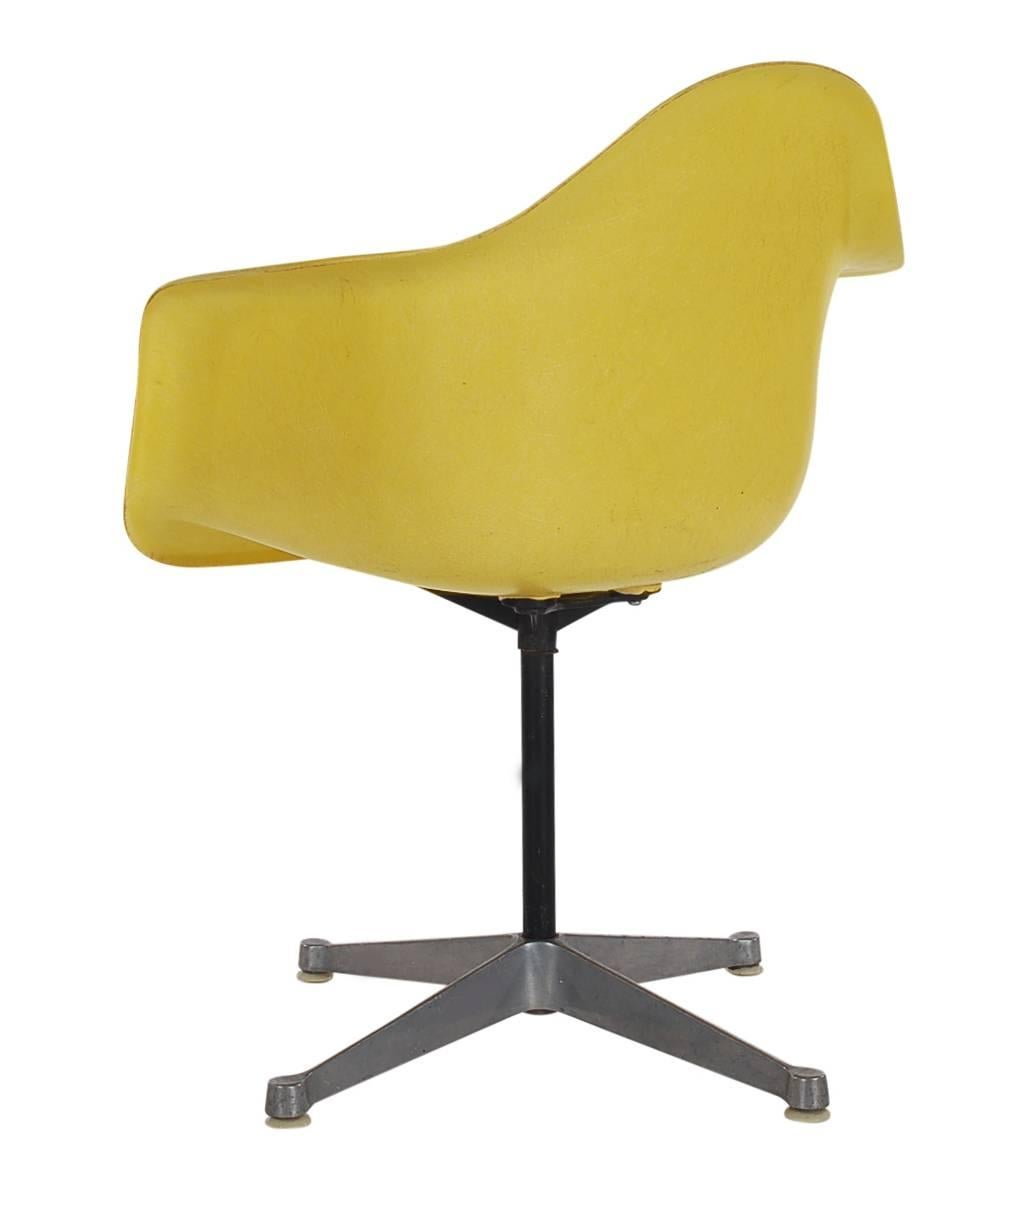 American Mid-Century Charles Eames for Herman Miller Fiberglass Dining Chairs in Yellow